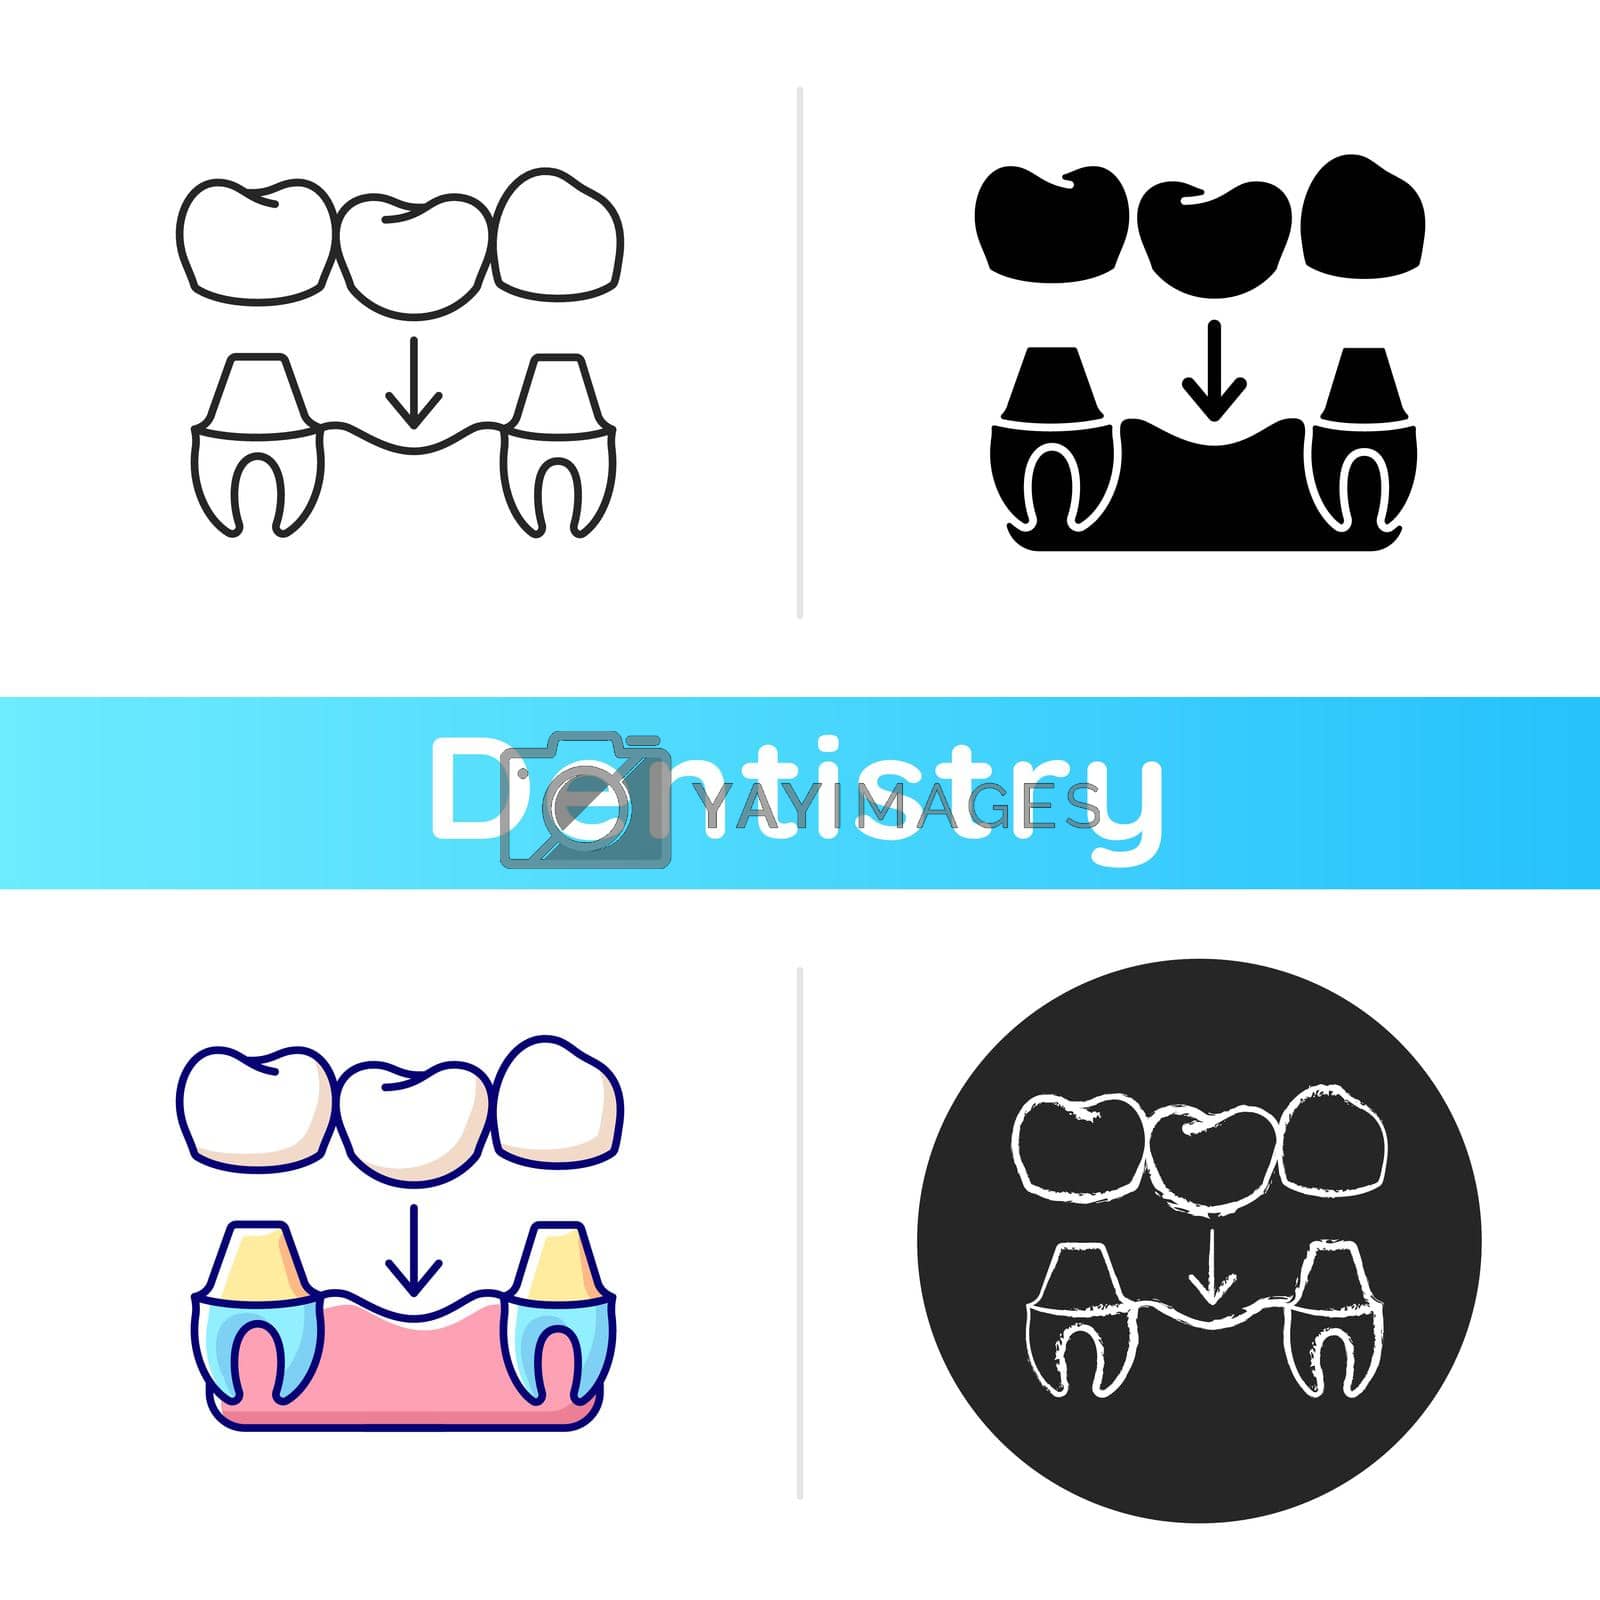 Dental prosthetics icon. Implant design. Instruments for dental treatment. Contemporary dental treatment. Linear black and RGB color styles. Isolated vector illustrations